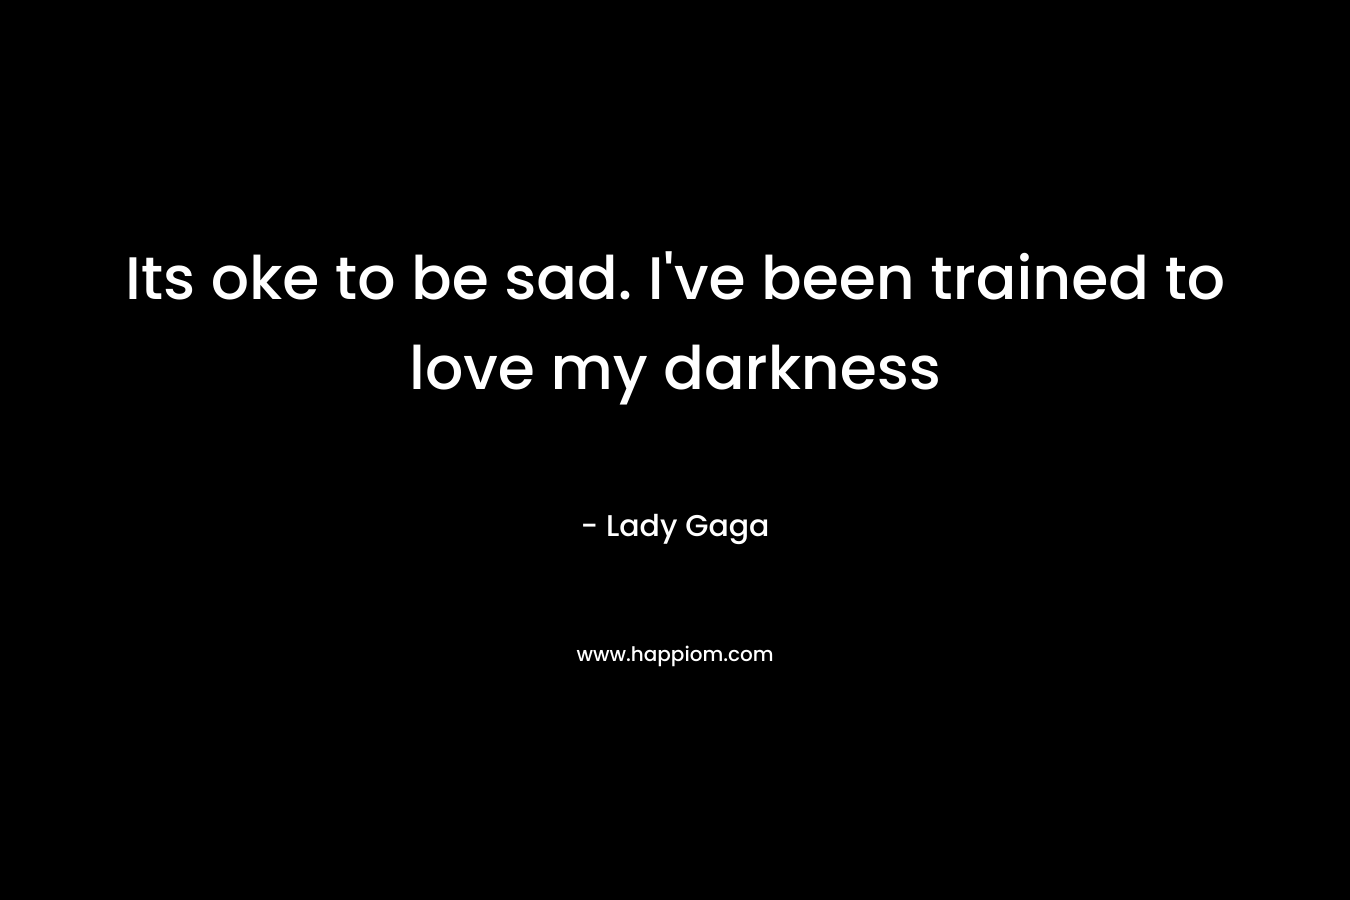 Its oke to be sad. I’ve been trained to love my darkness – Lady Gaga